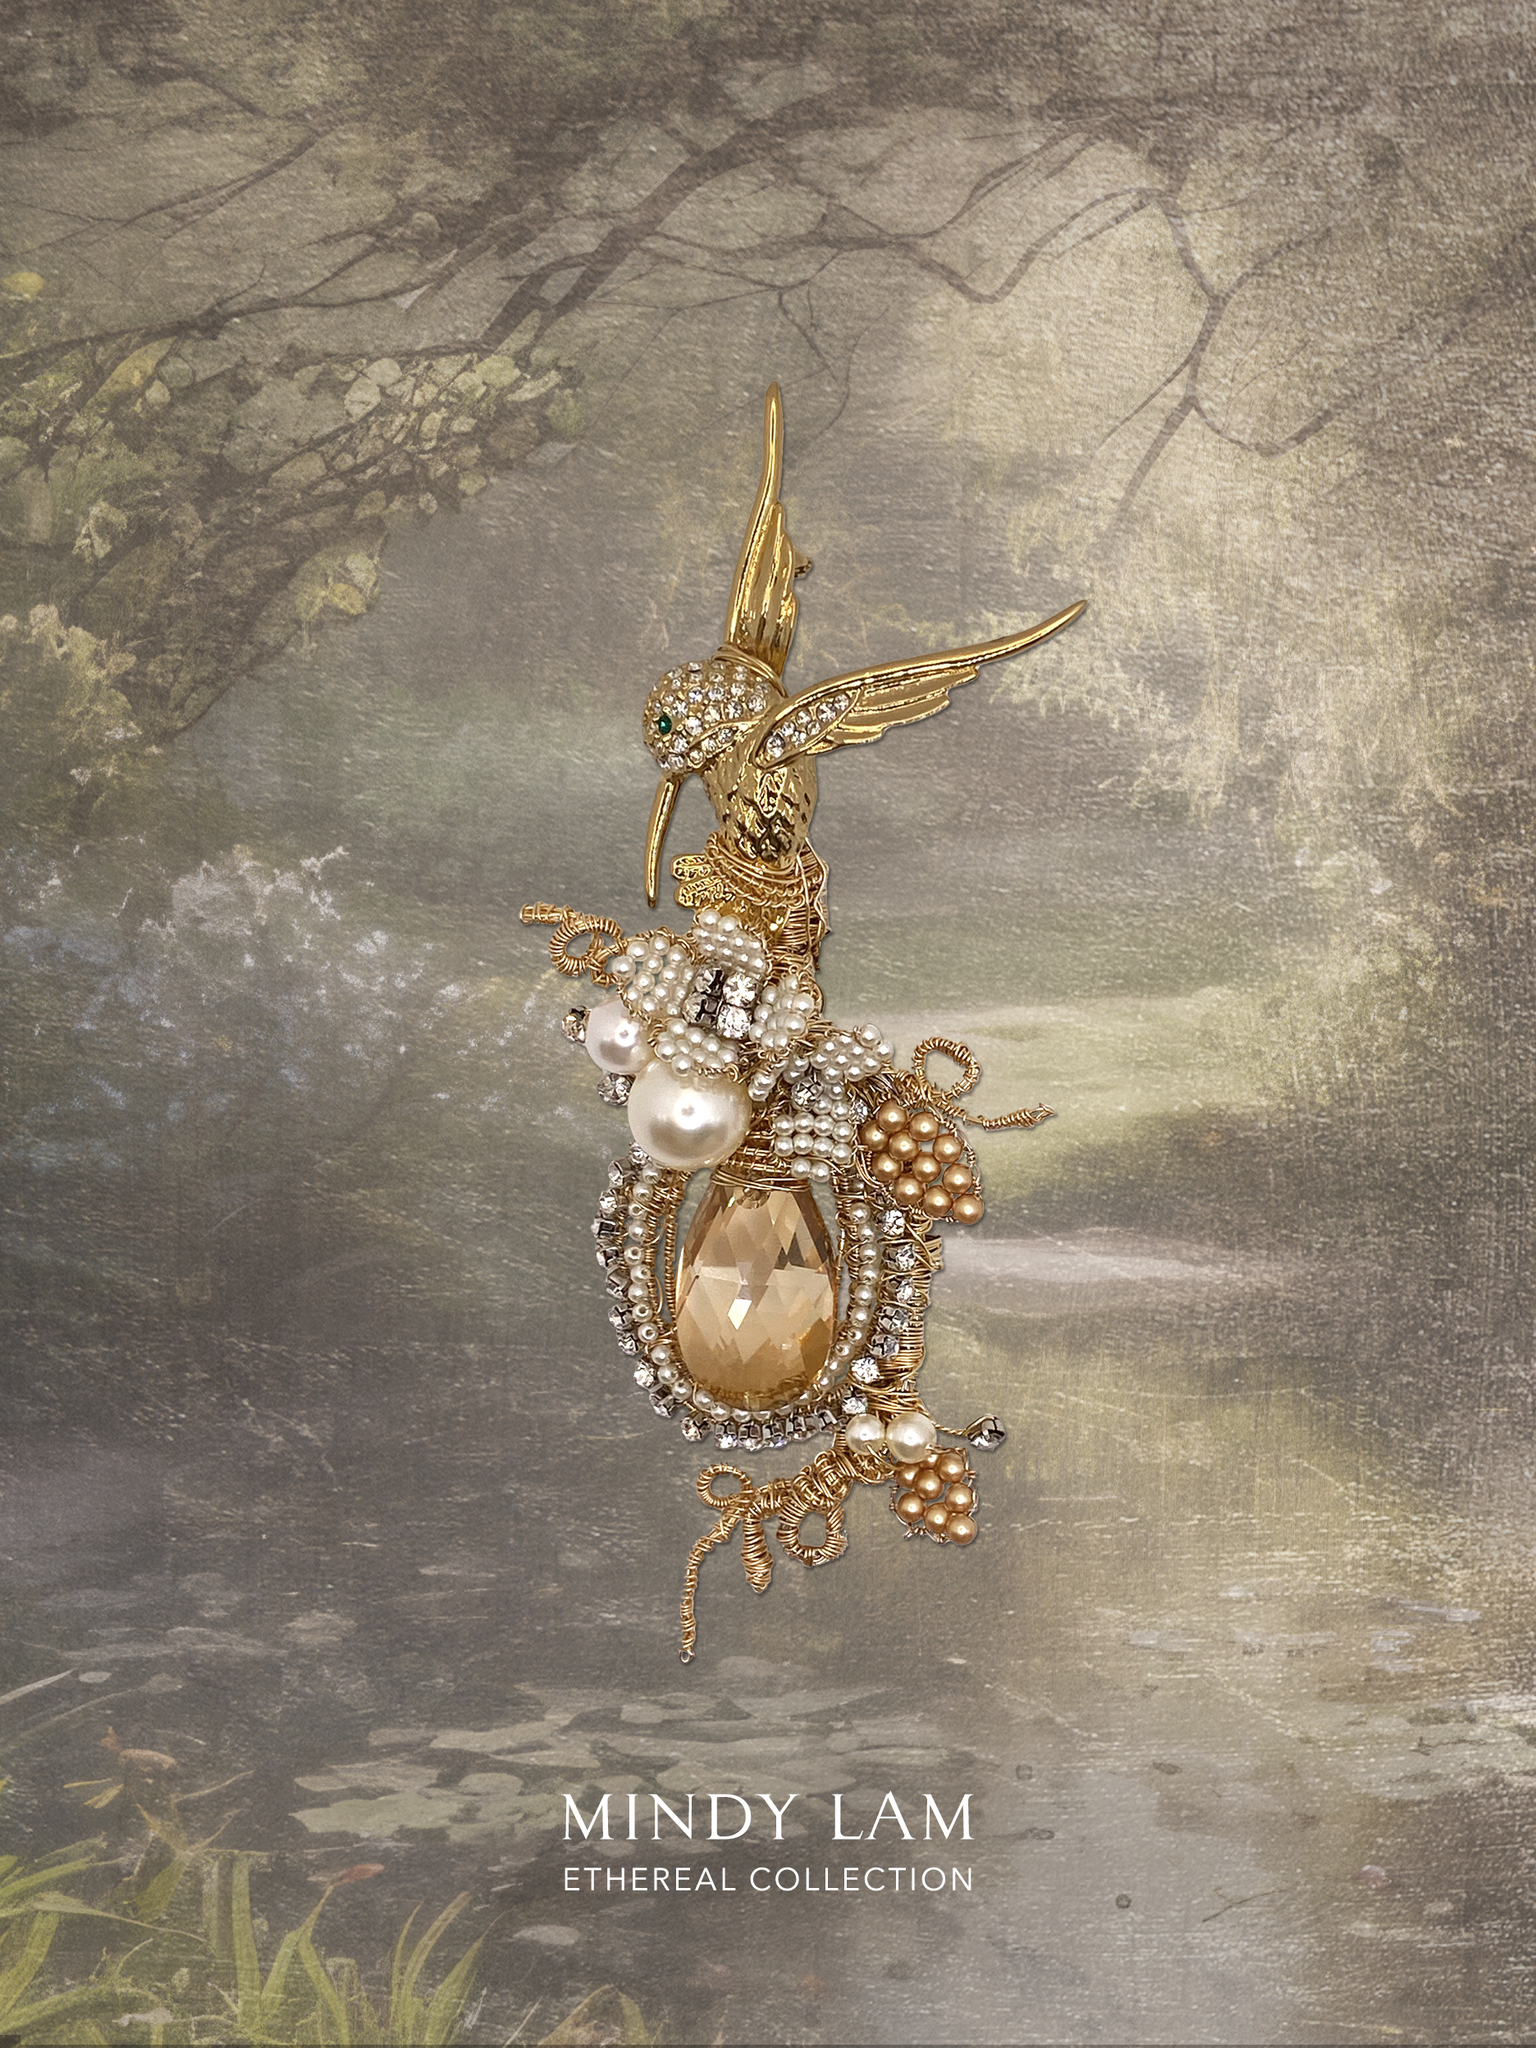 Ethereal Collection Lapel Pin - Flight of Love